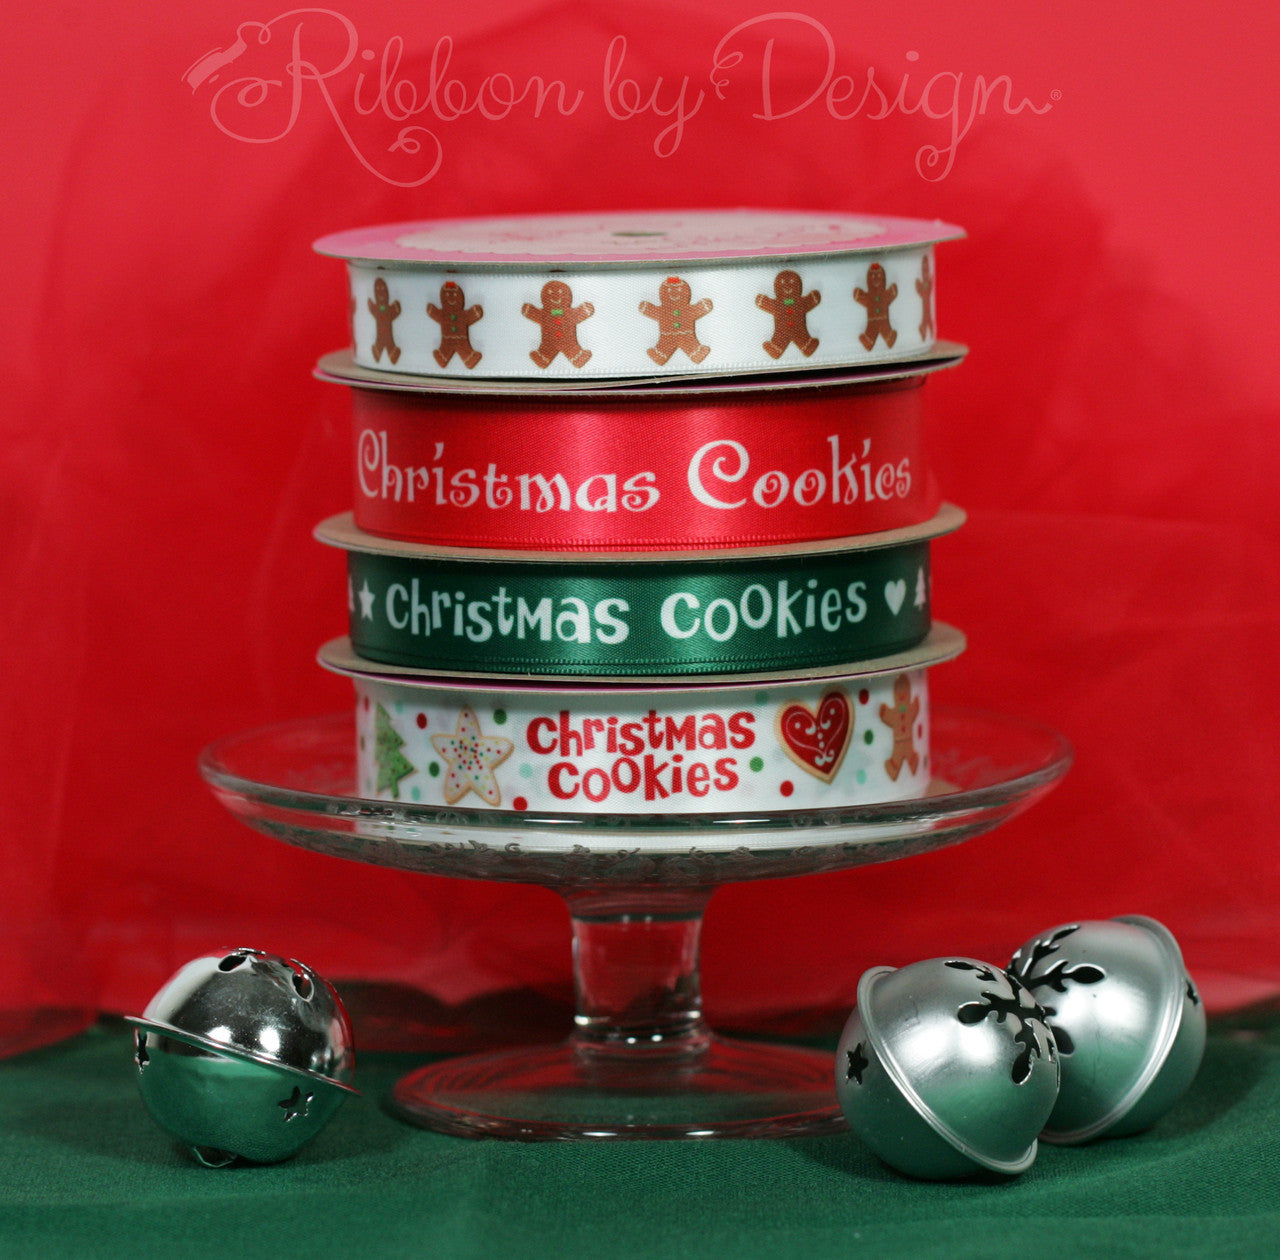 Christmas Cookies Ribbon Cookie designs on 7/8" White Single Face Satin